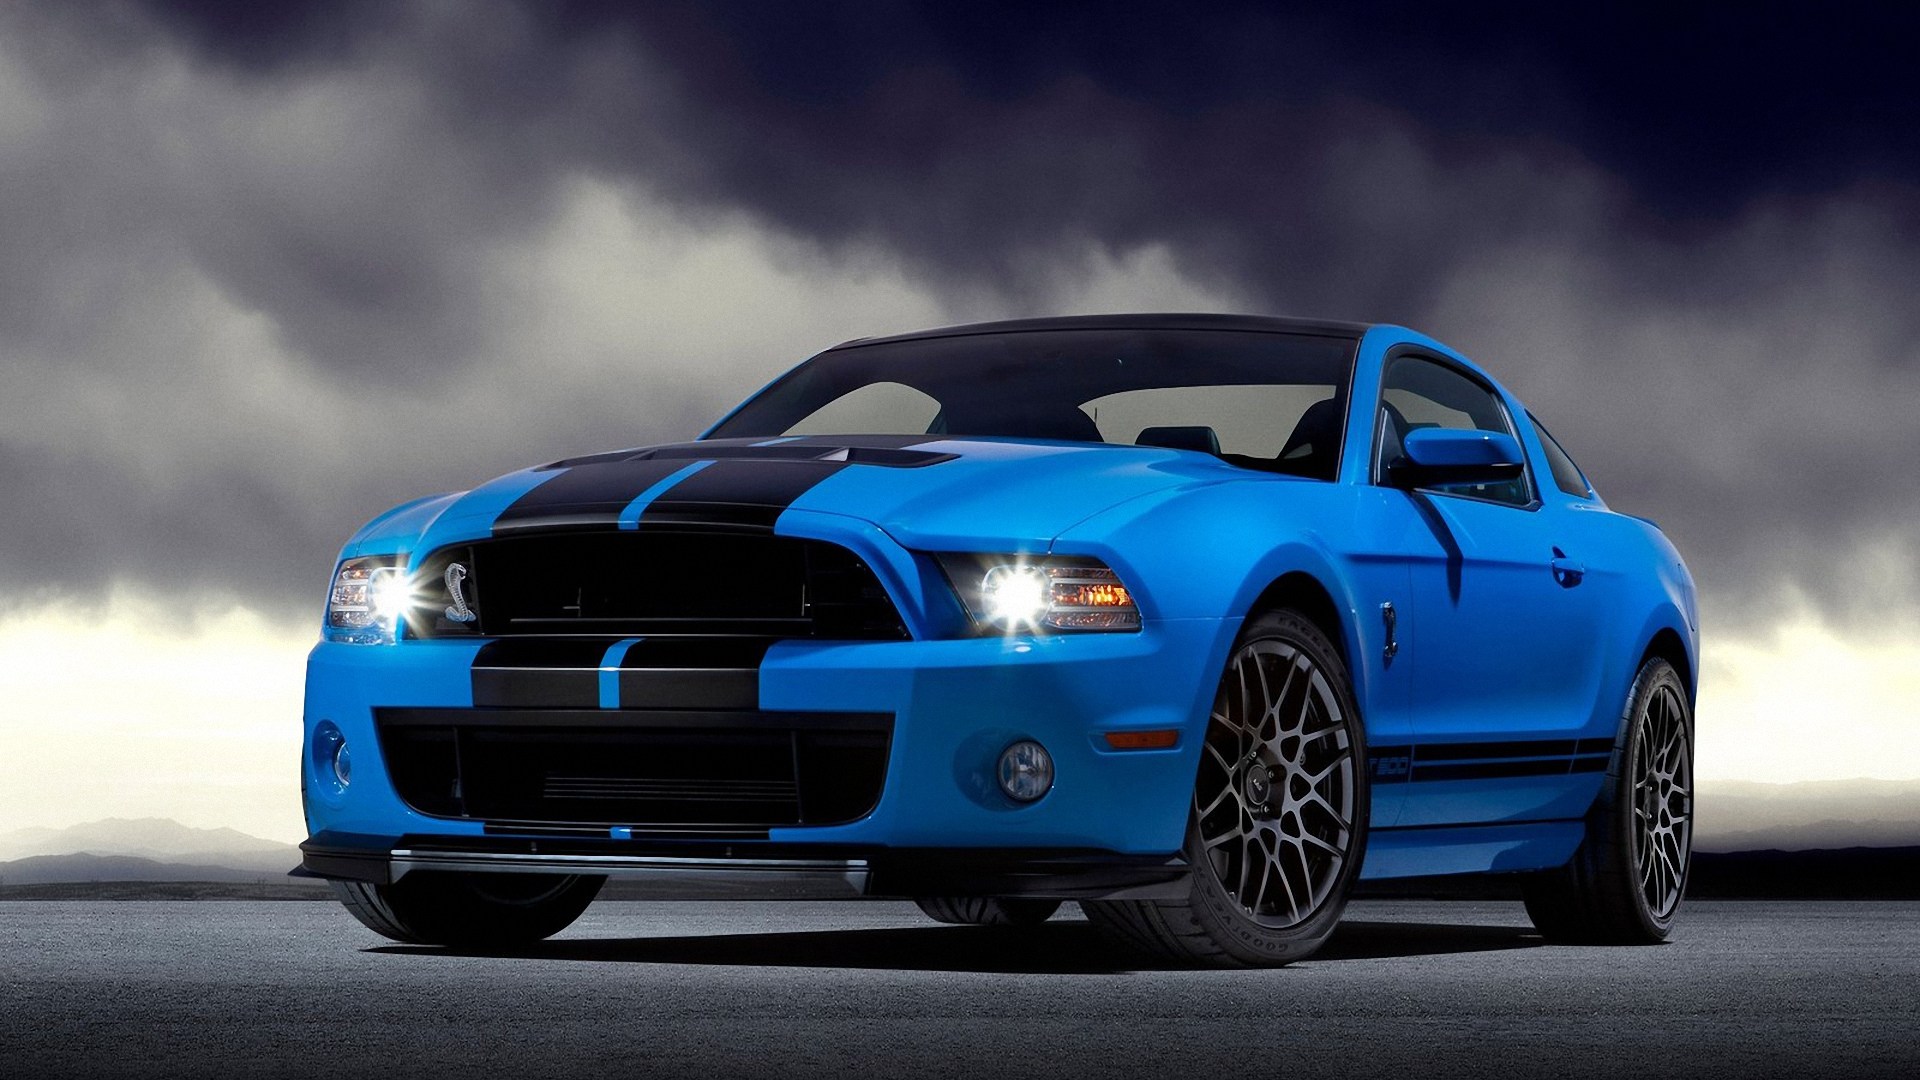 Ford Mustang Hd Wallpapers 1080p Mustang Ford Shelby 2013 1920x1080 Wallpaper Teahub Io